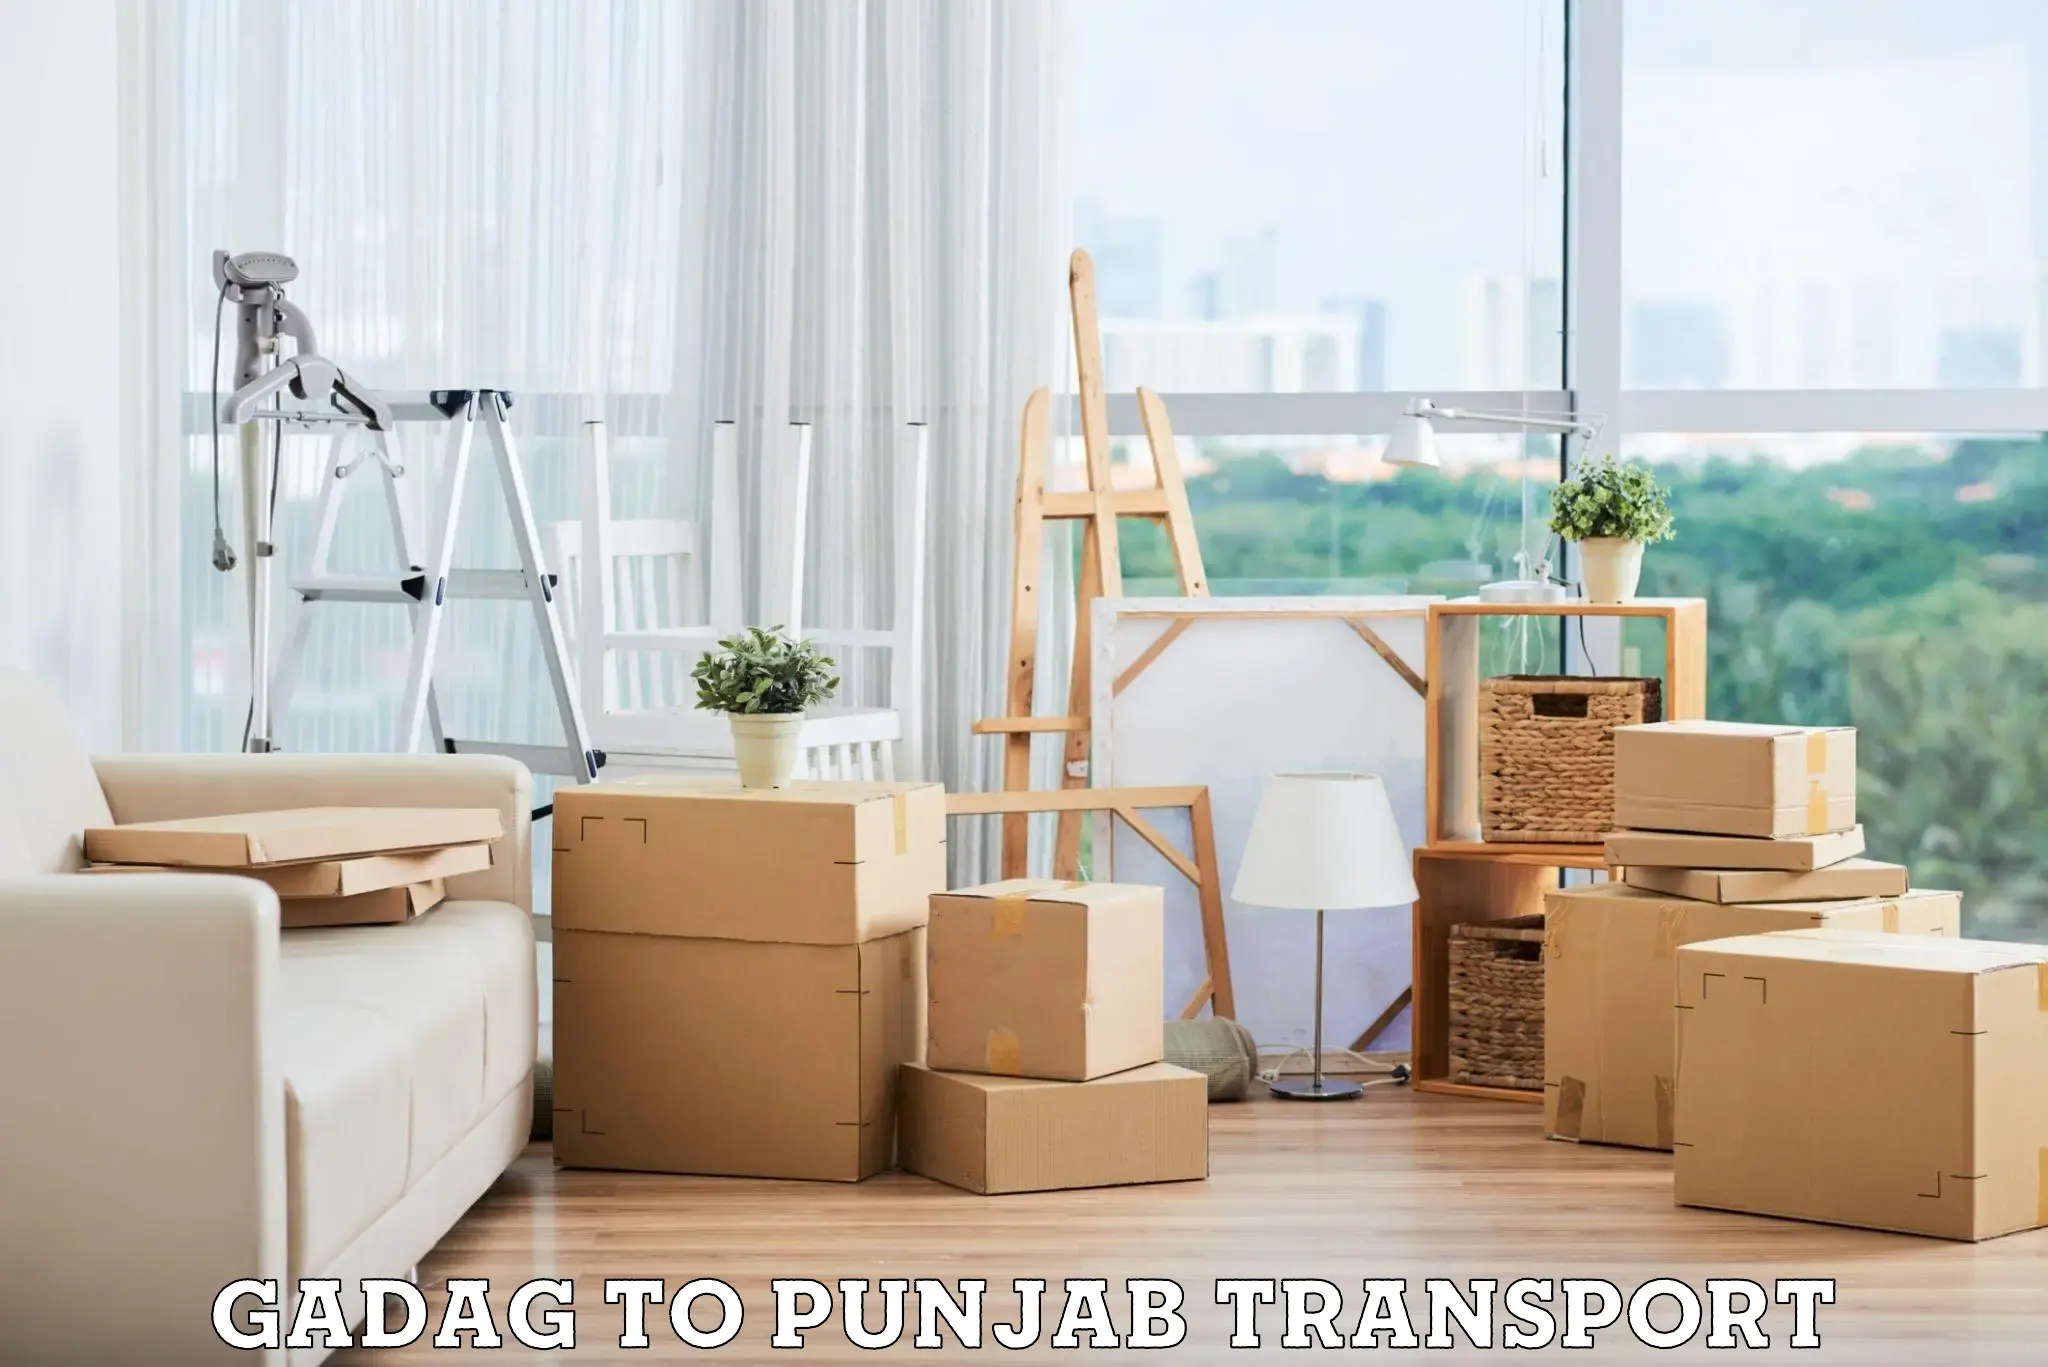 Commercial transport service Gadag to Ludhiana